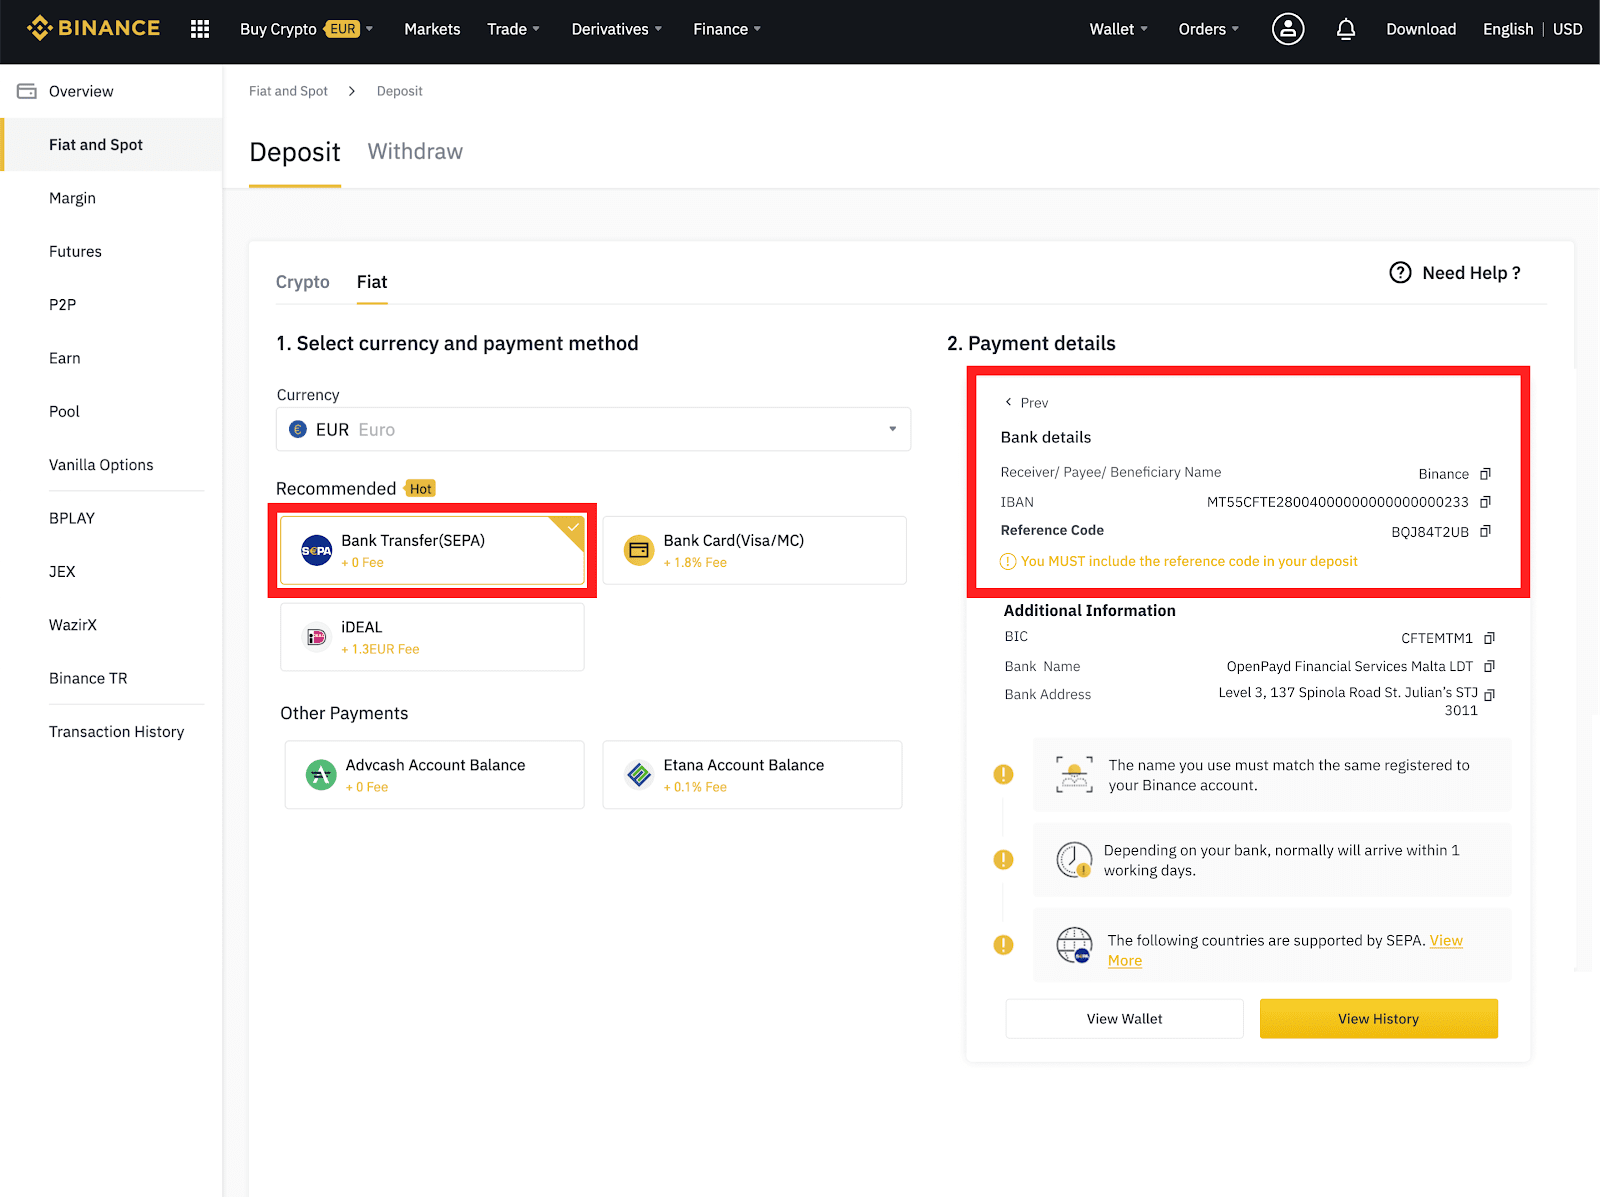 How to deposit EUR to Binance by Bank transfer in Germany